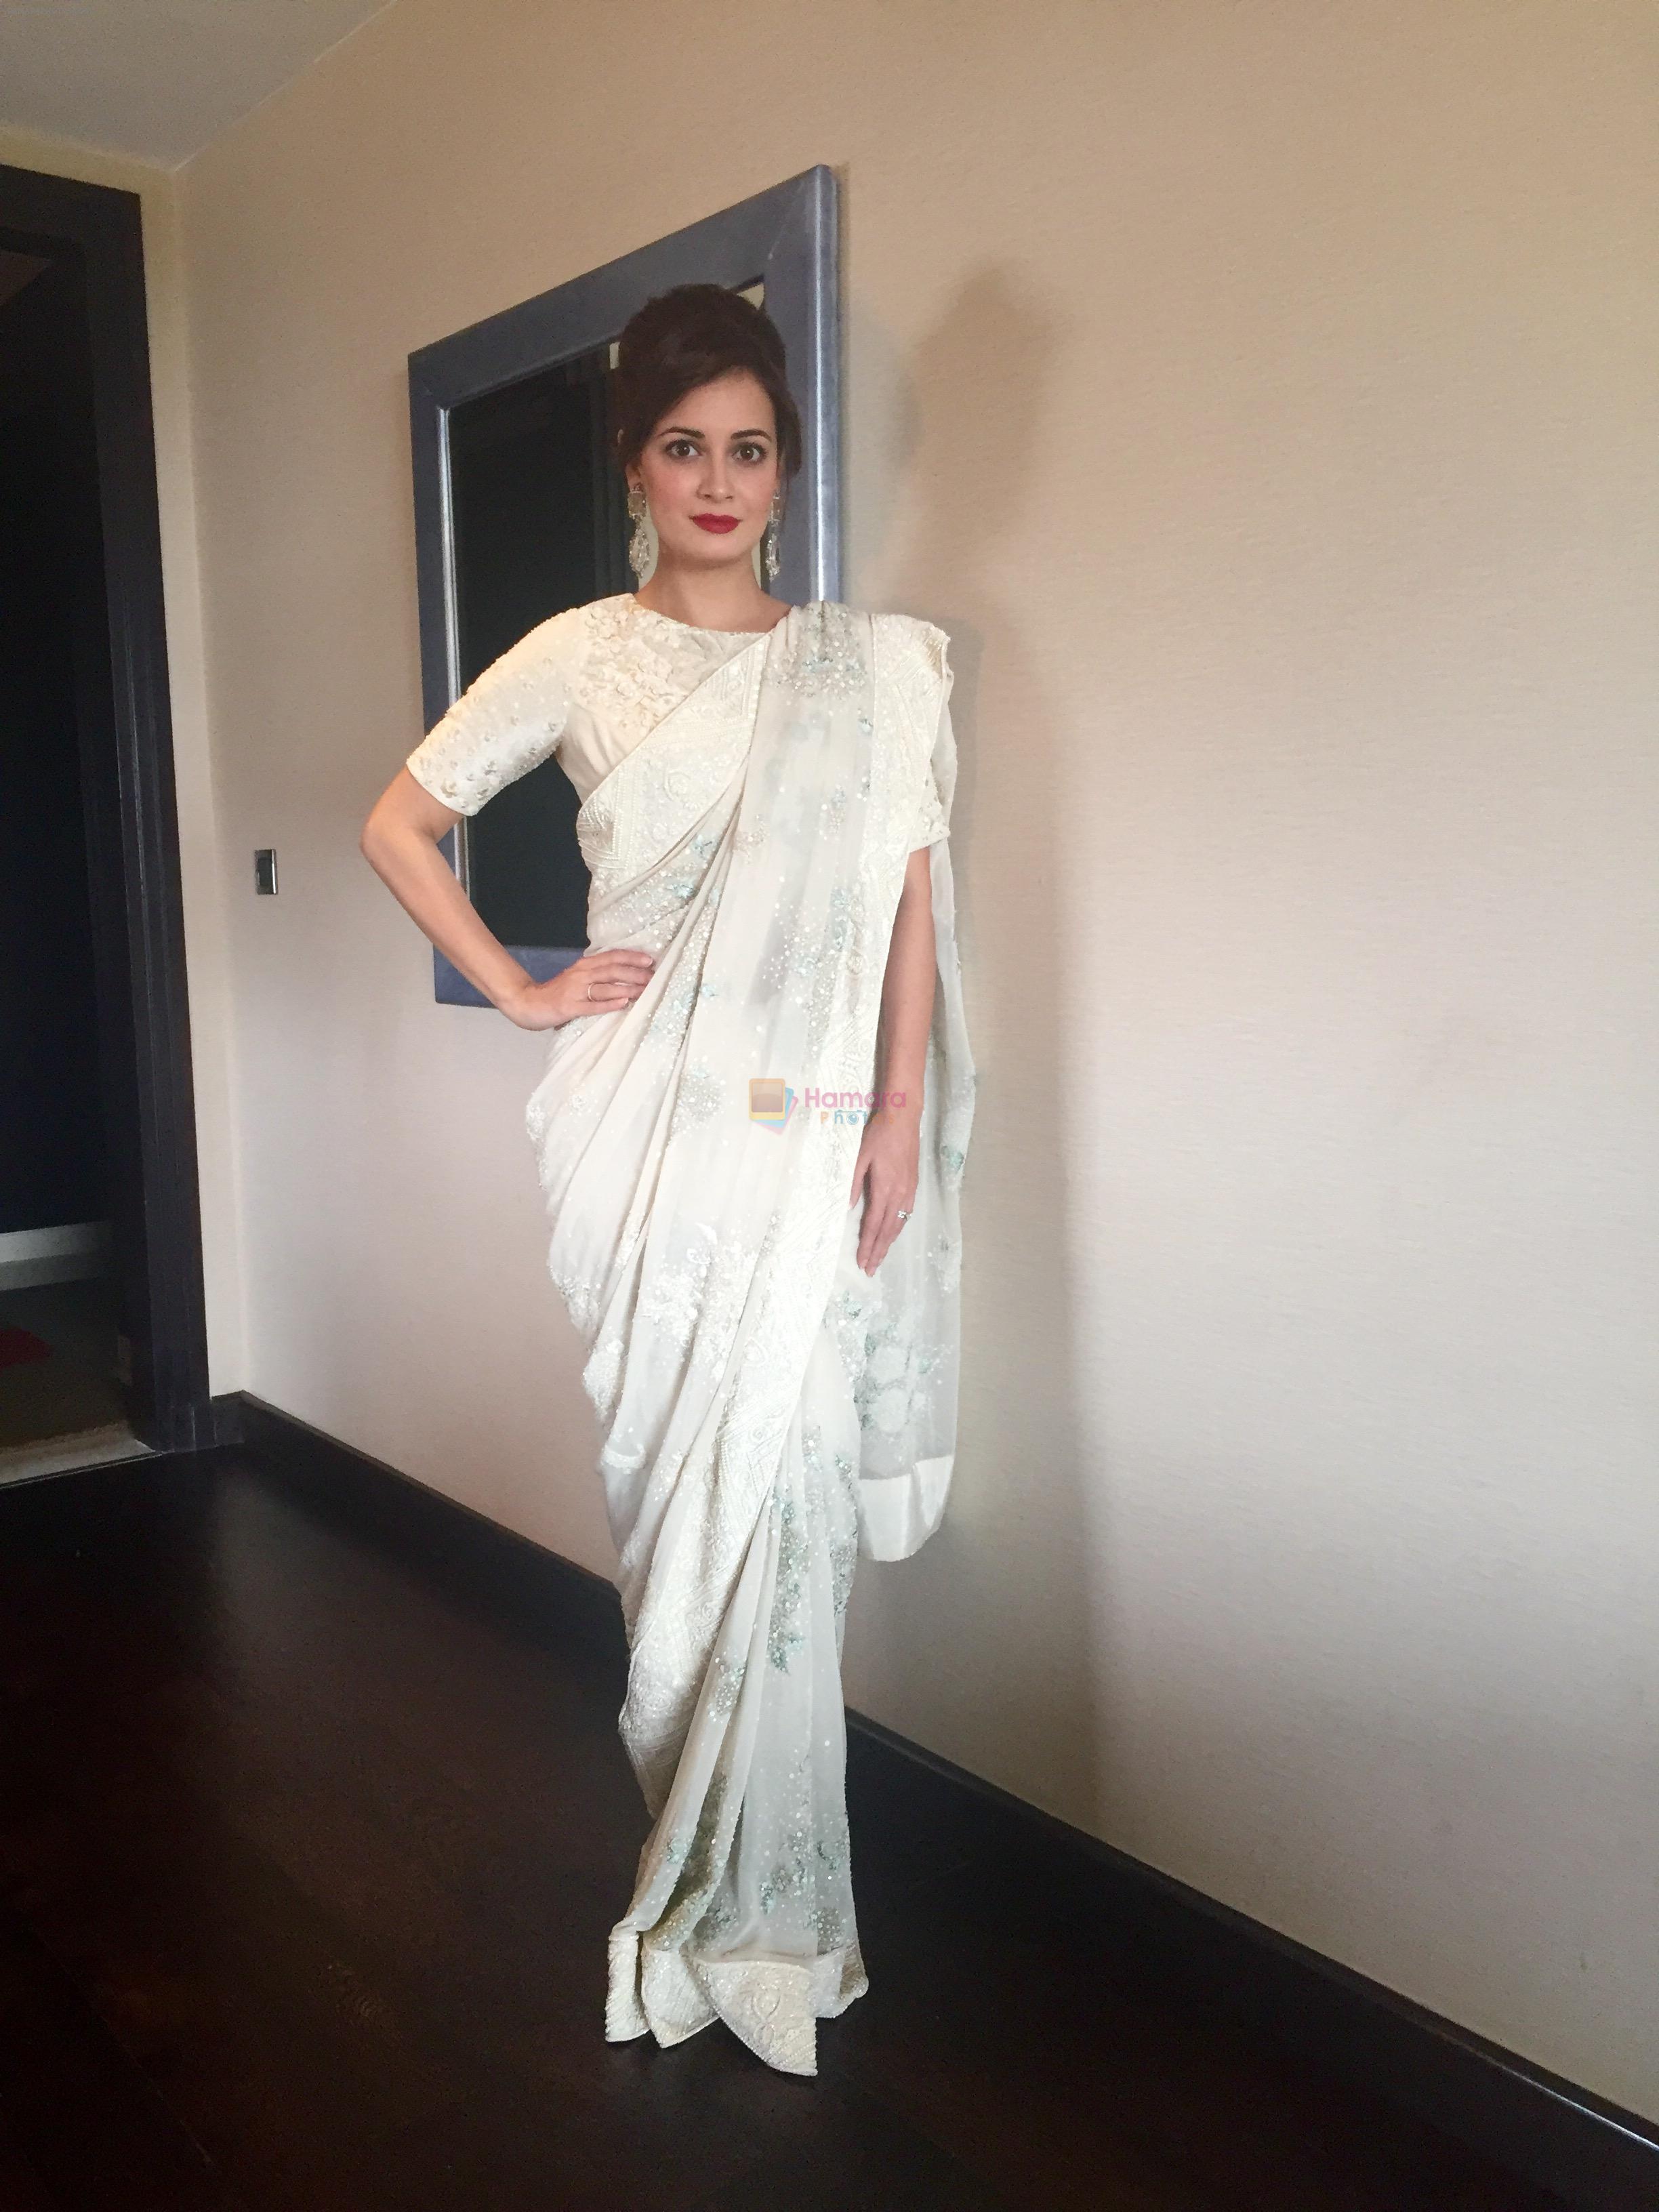 Dia Mirza wearing tone-on-tone ivory sari by Varun Bahl and earrings by Aurelle and a classic red pout